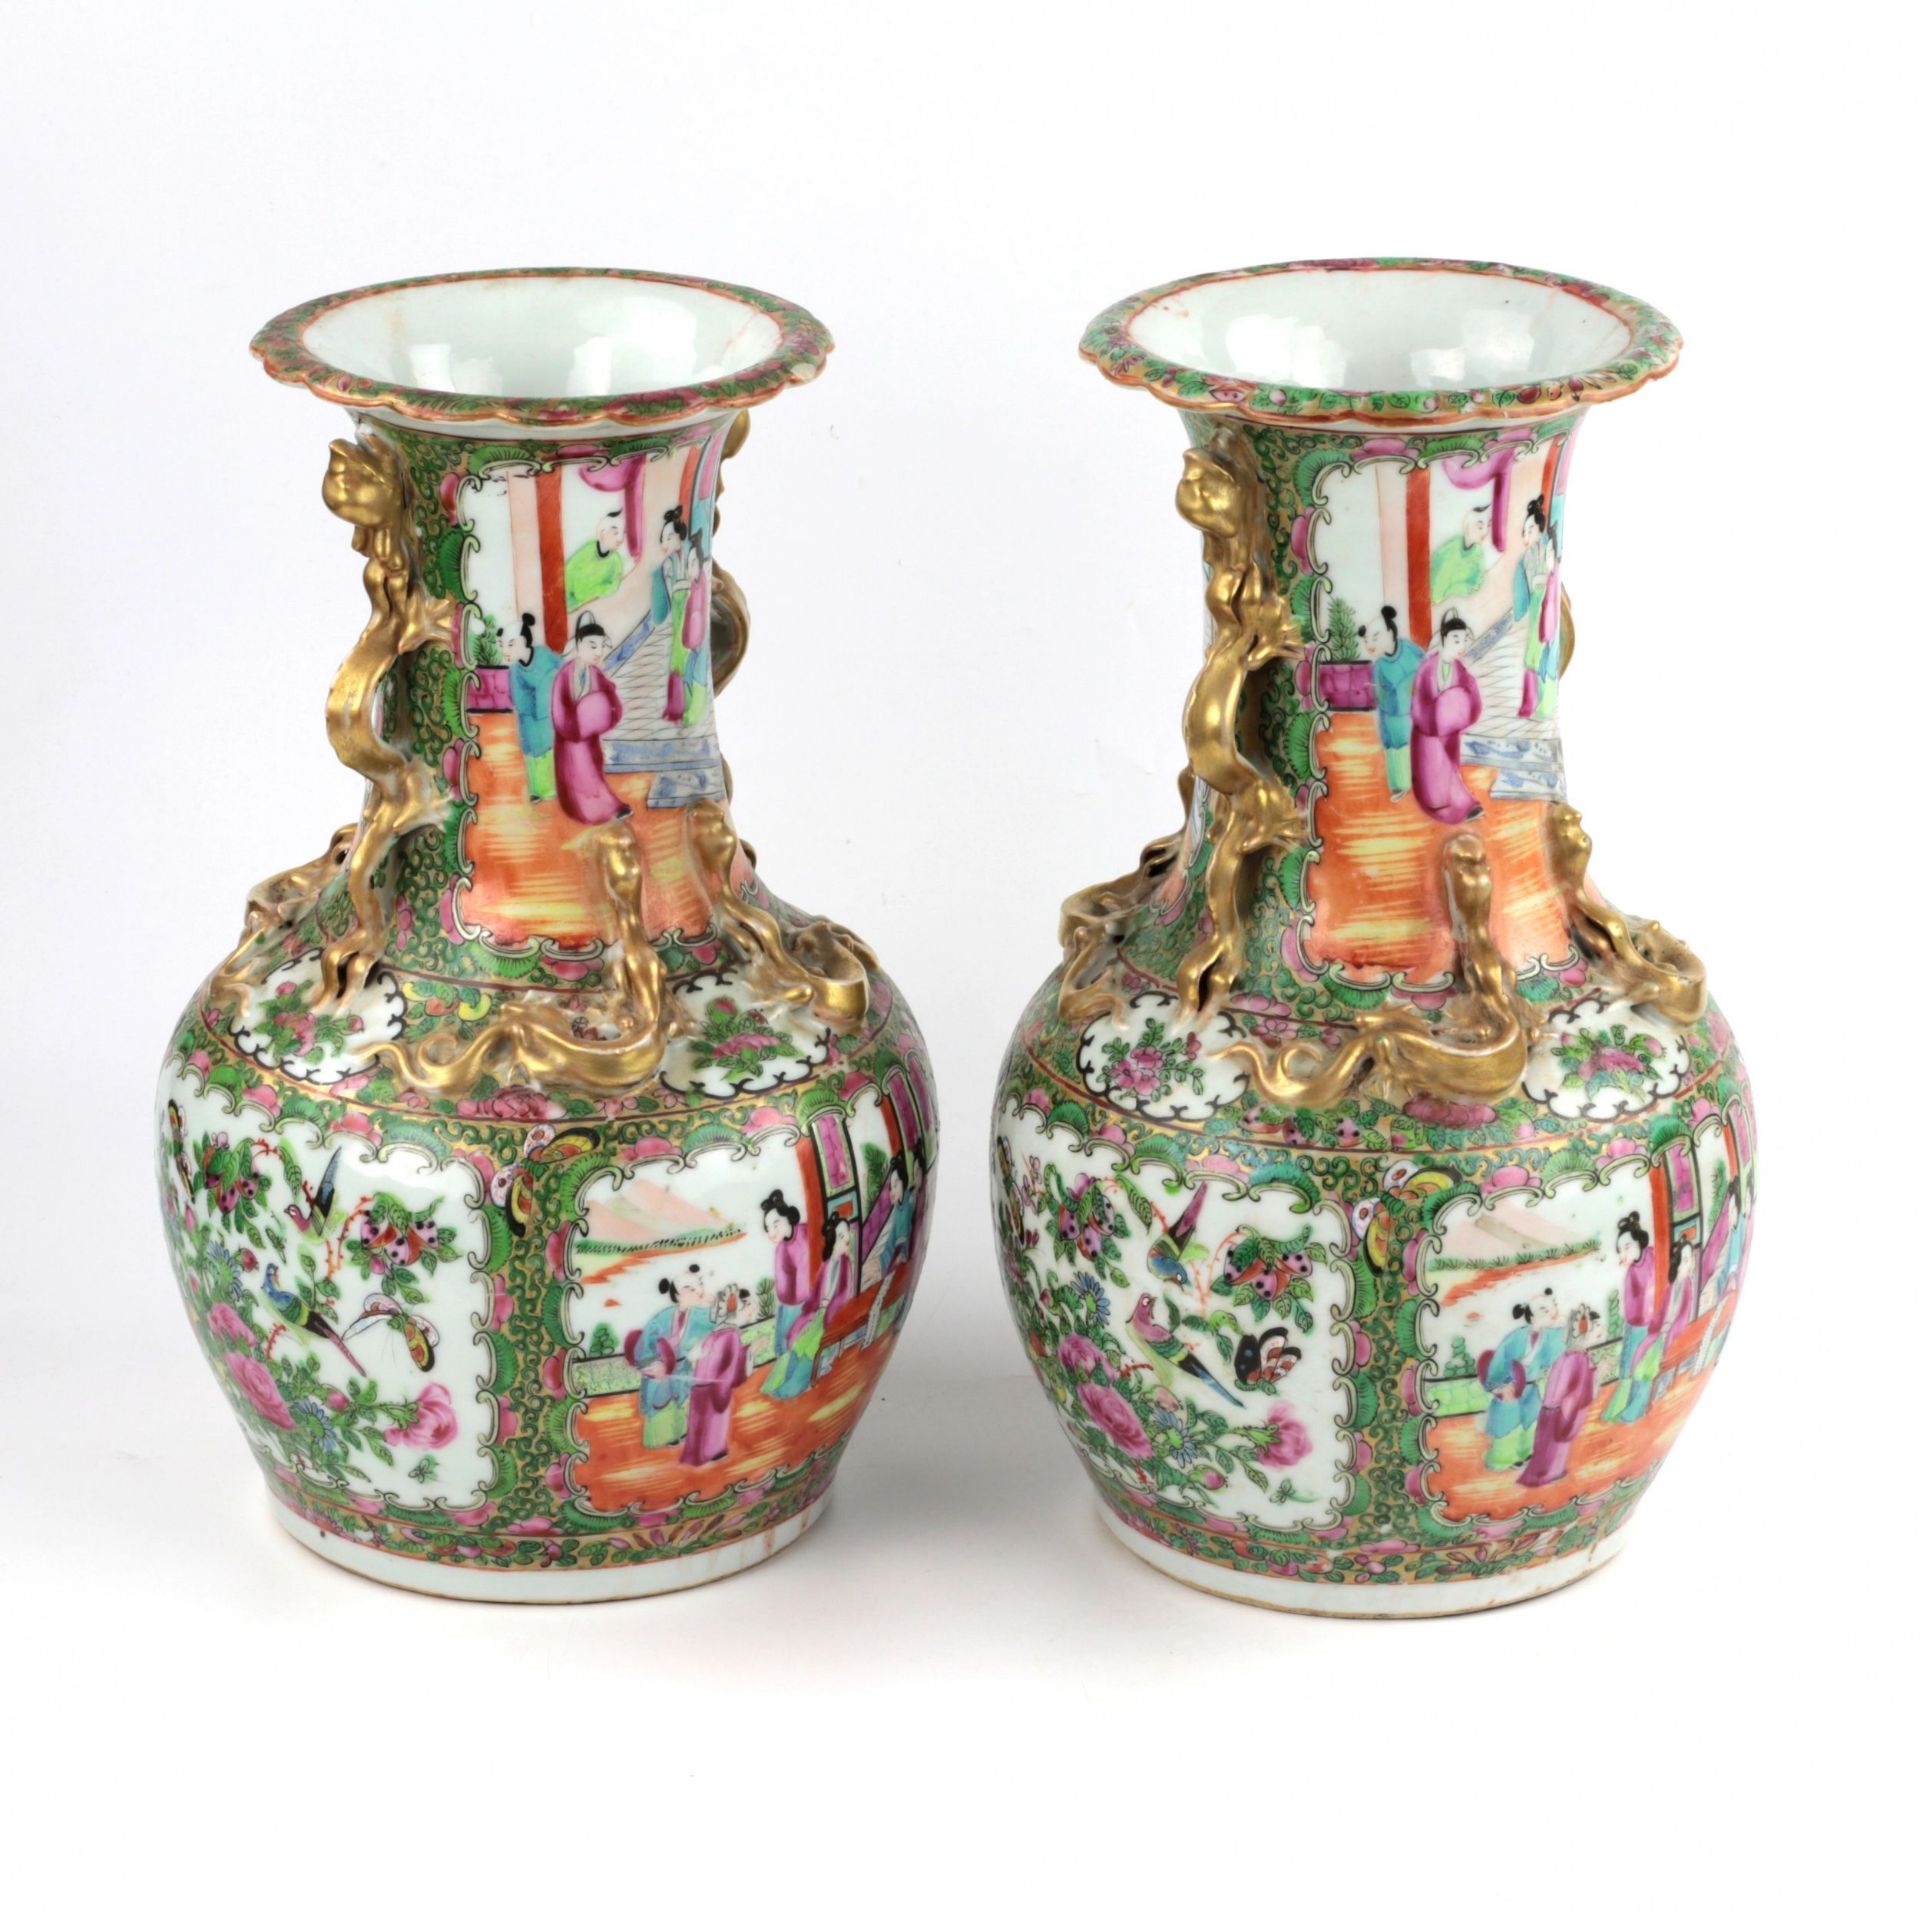 Pair of Cantonese Vases "Family Rose". - Image 4 of 5